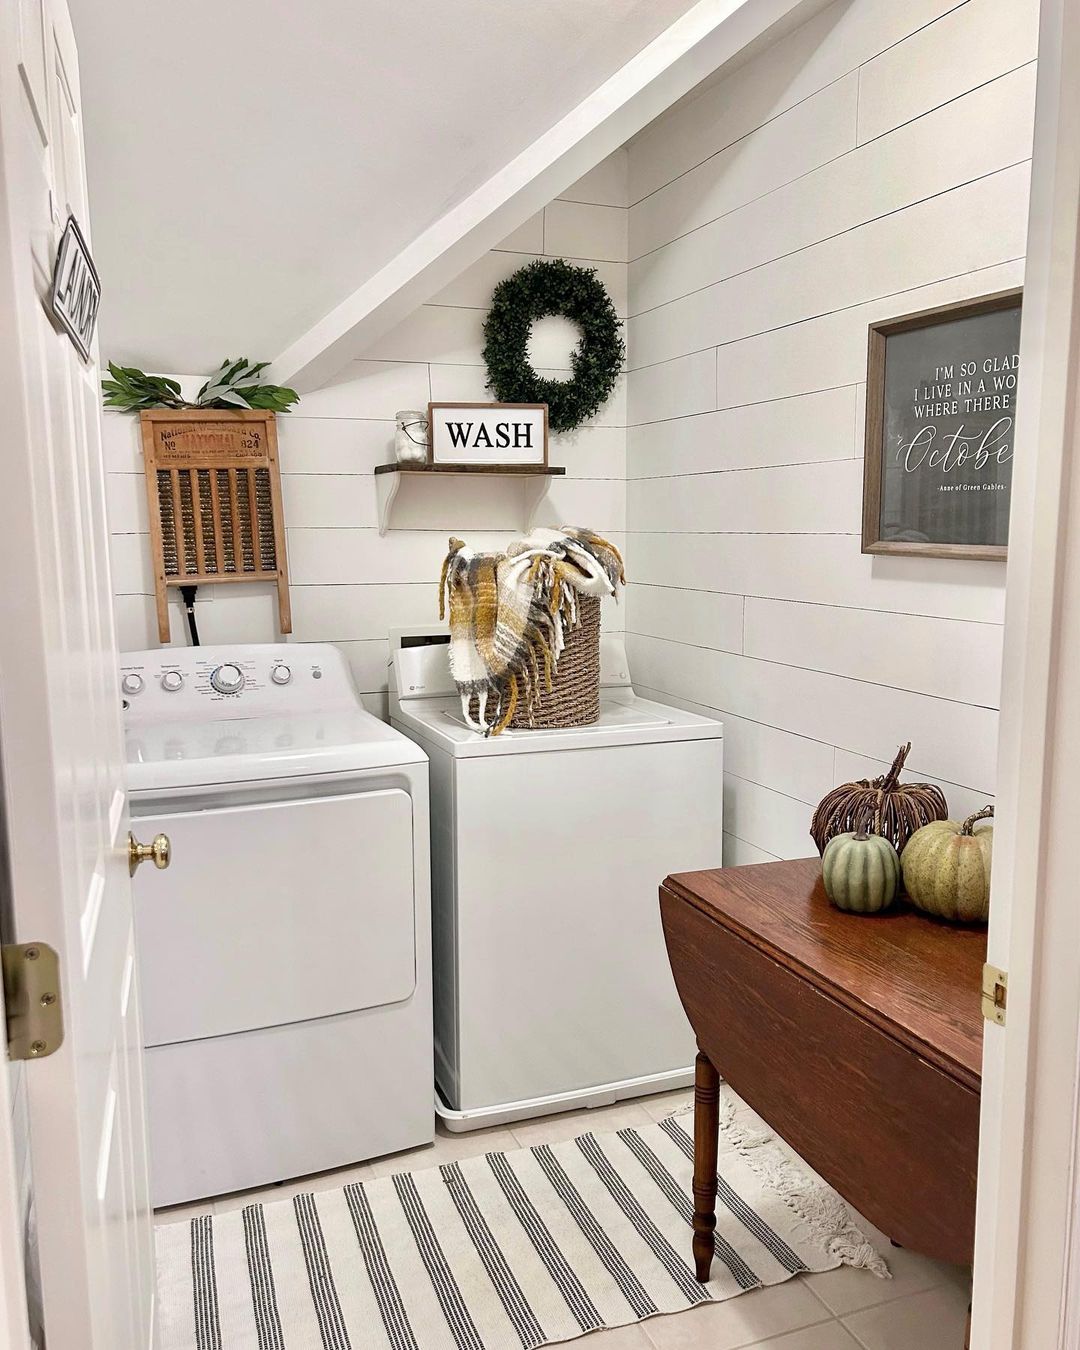 Make Use of Angled Ceilings in a Shiplap Laundry Room